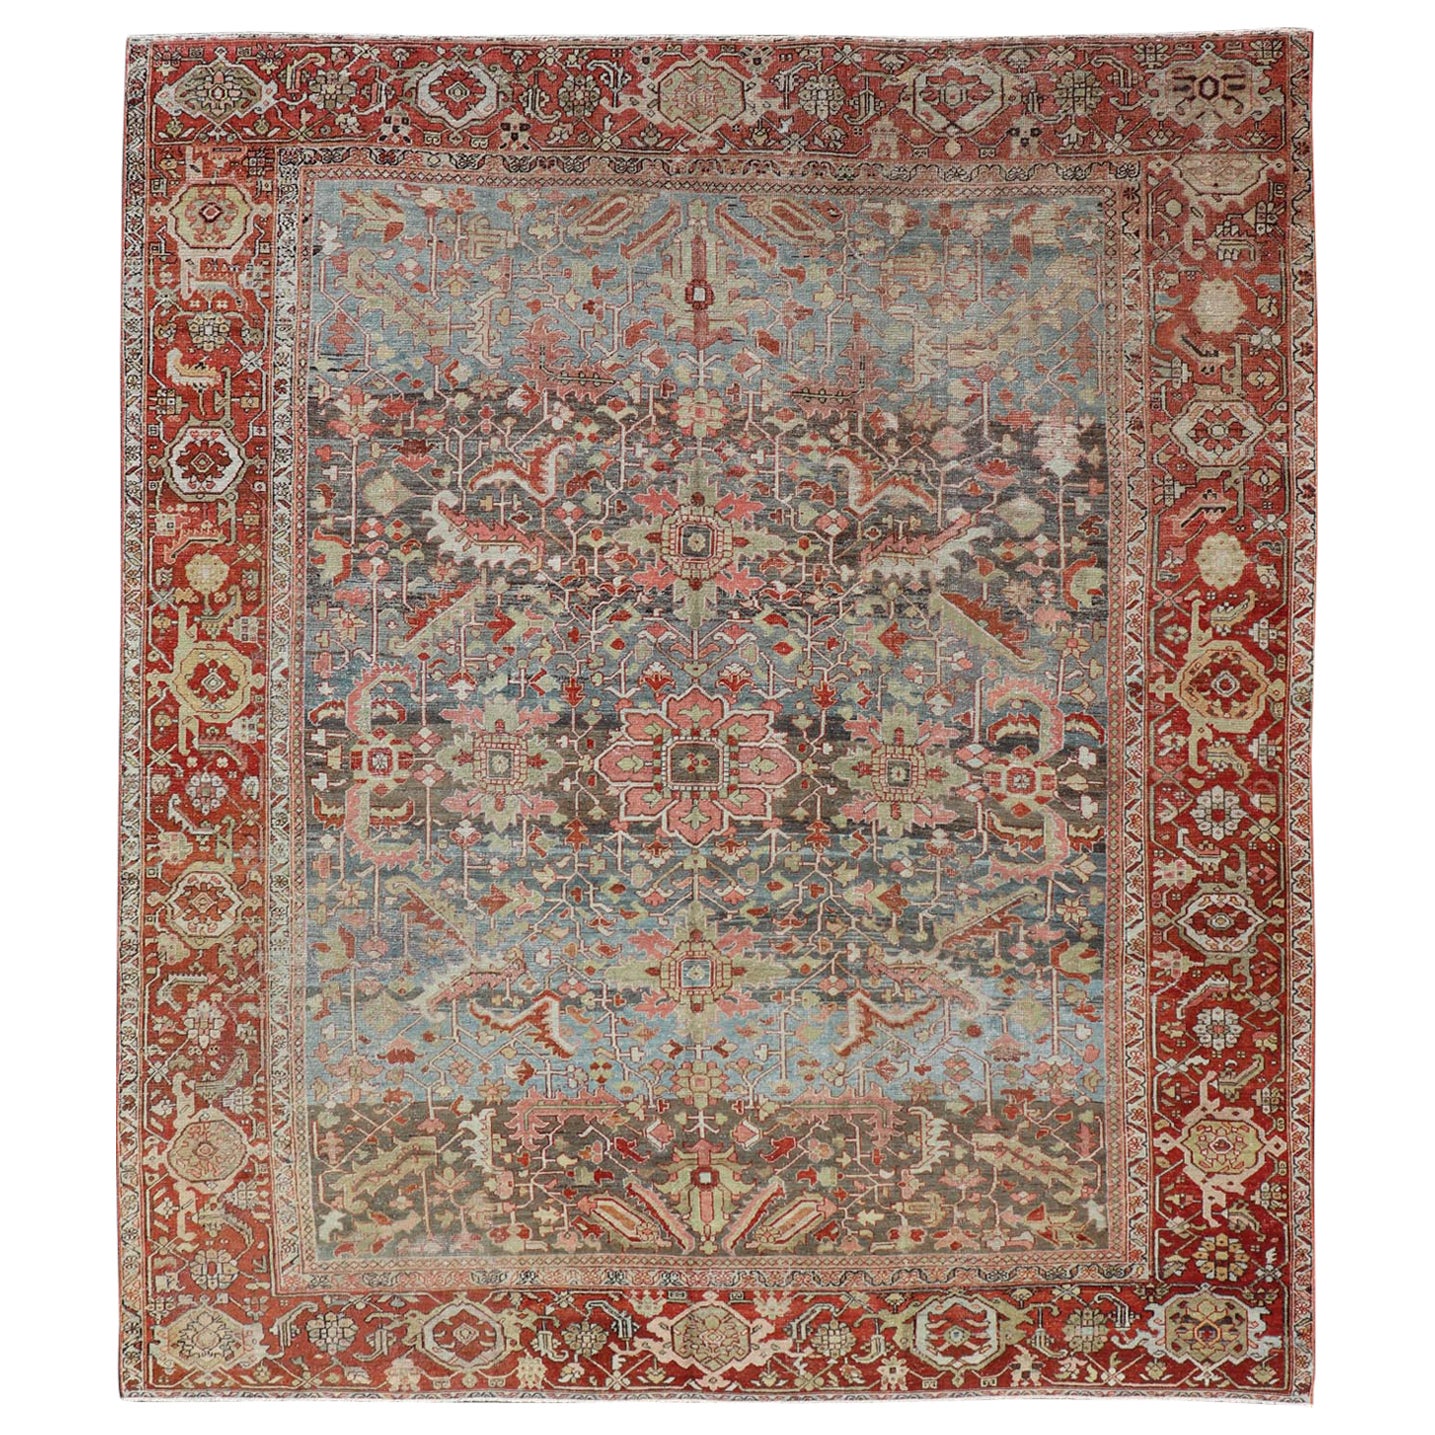 Persian Antique Serapi Rug with All-Over Geometric Design in Gray-Blue and Red 